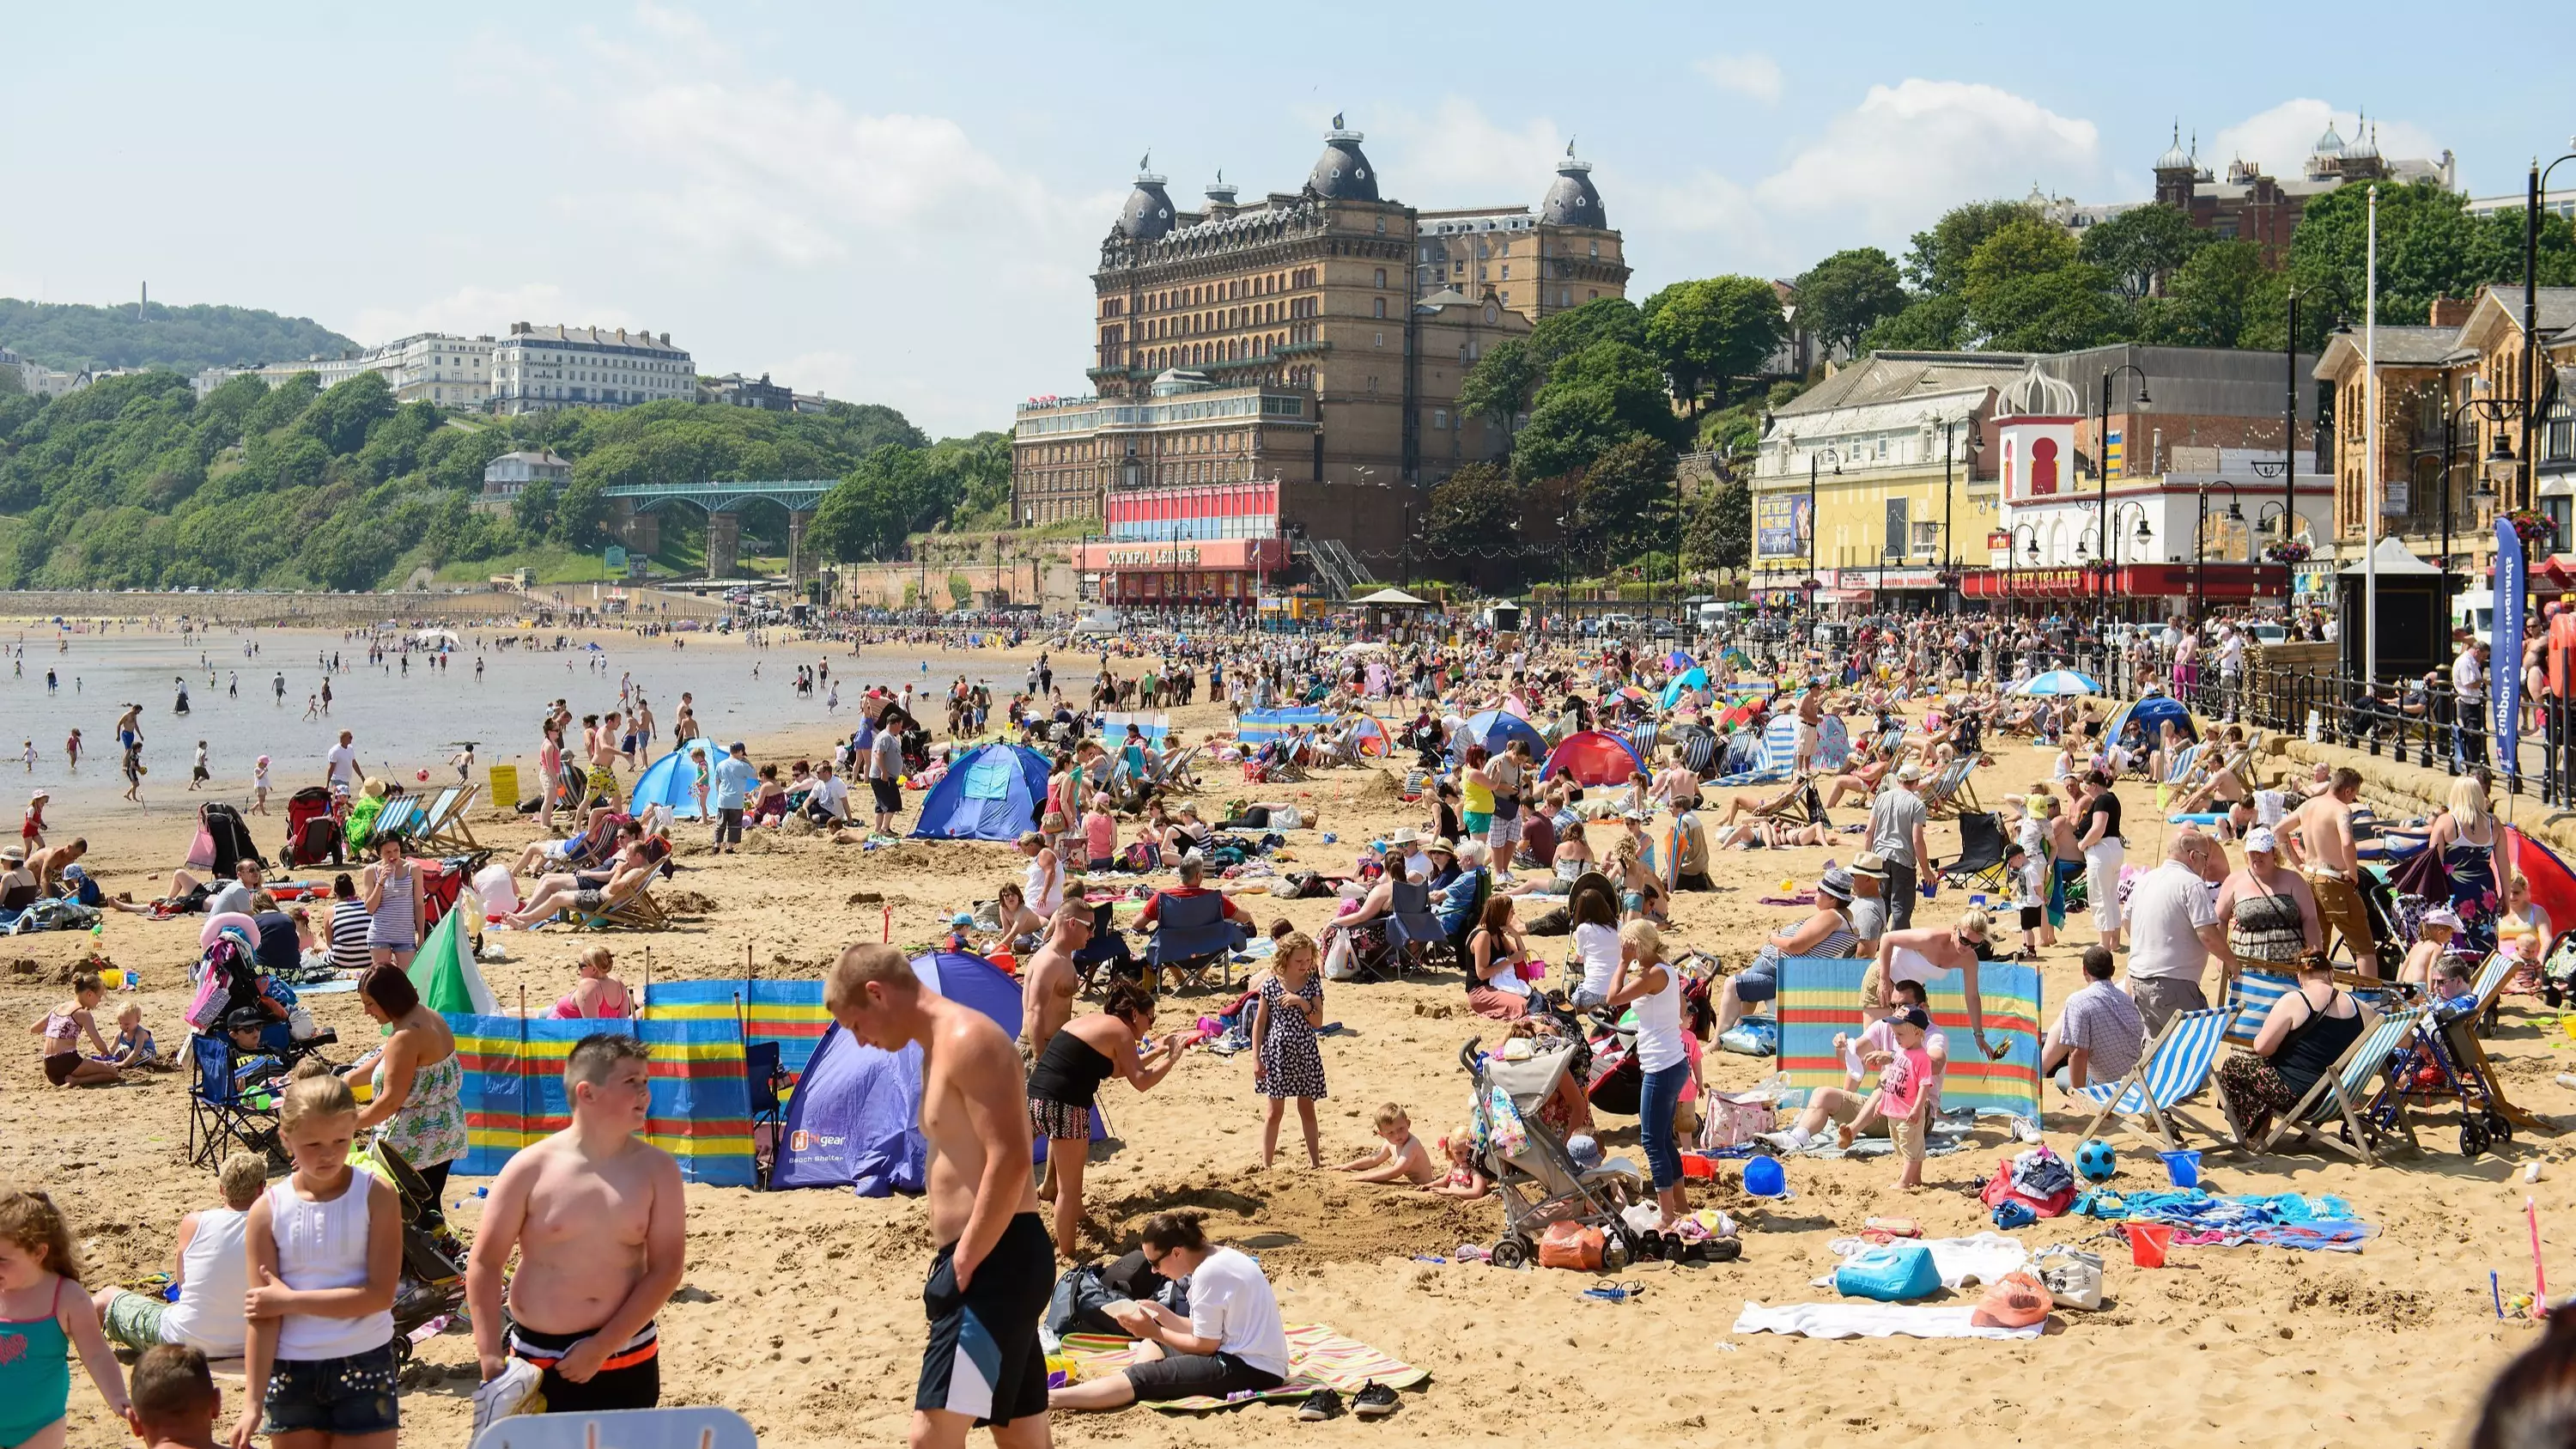 UK Could See Temperatures Rise To 20 Degrees Next Week